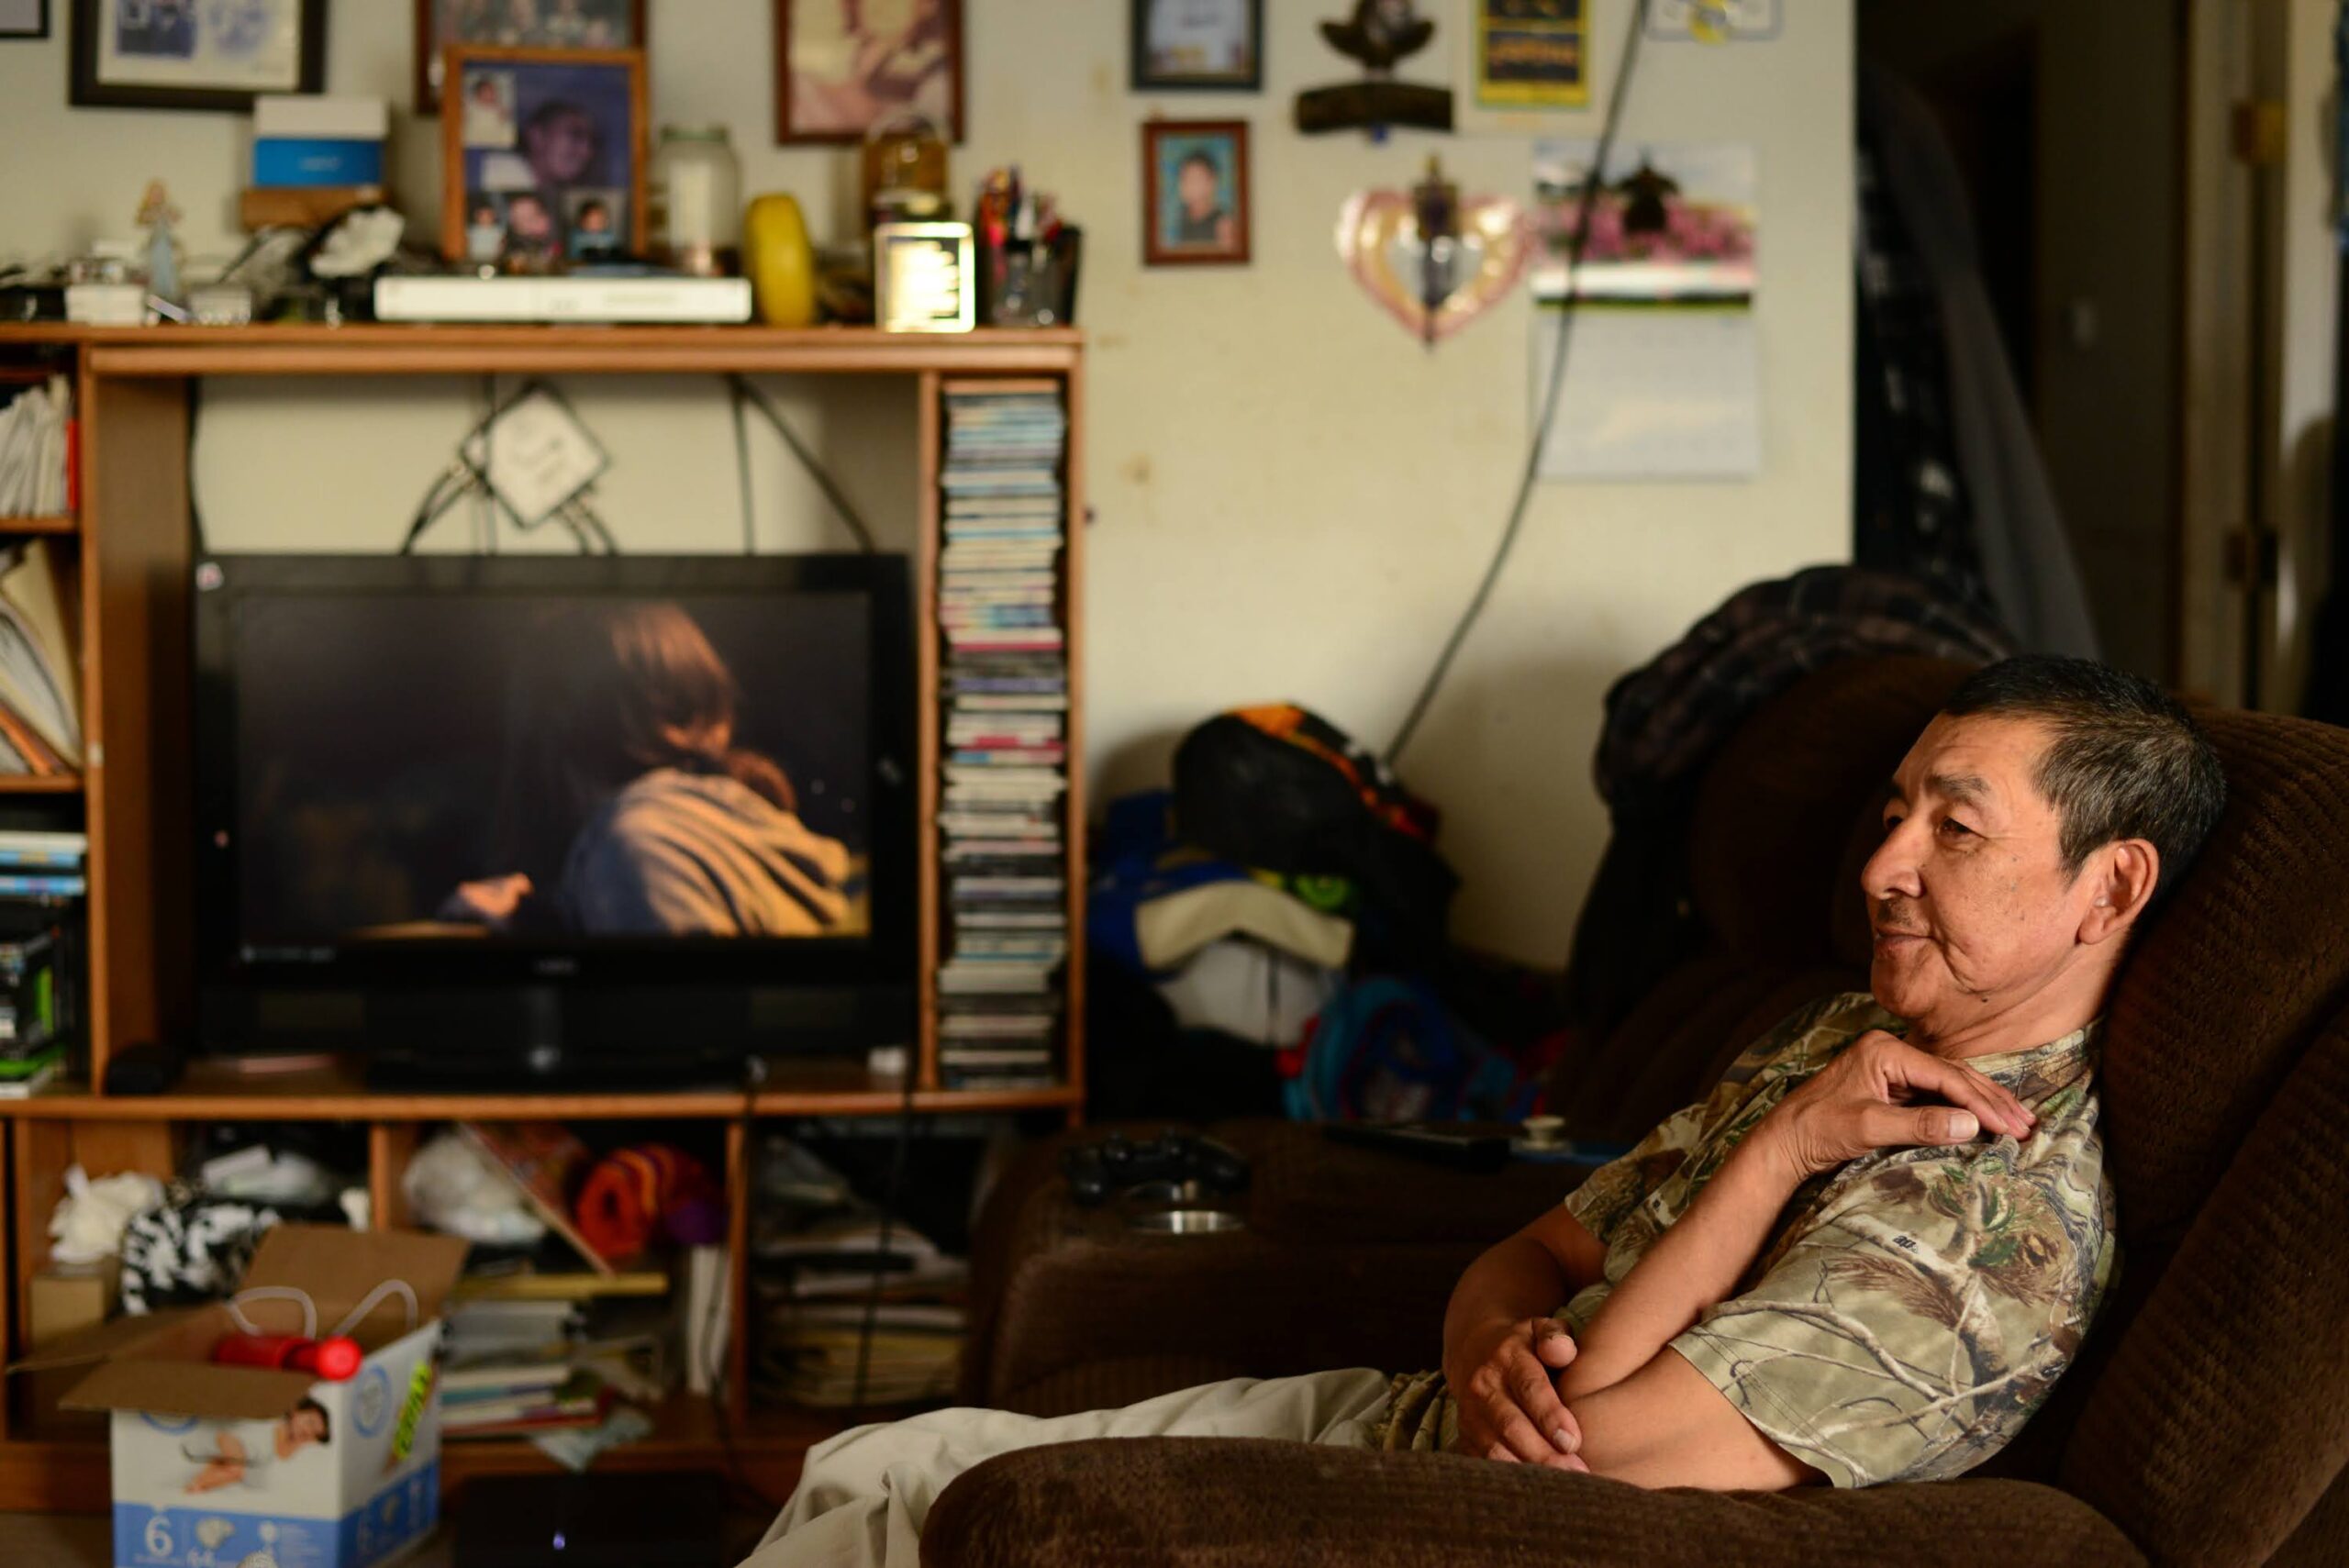 a man sits on a couch inside, with the TV on in the background